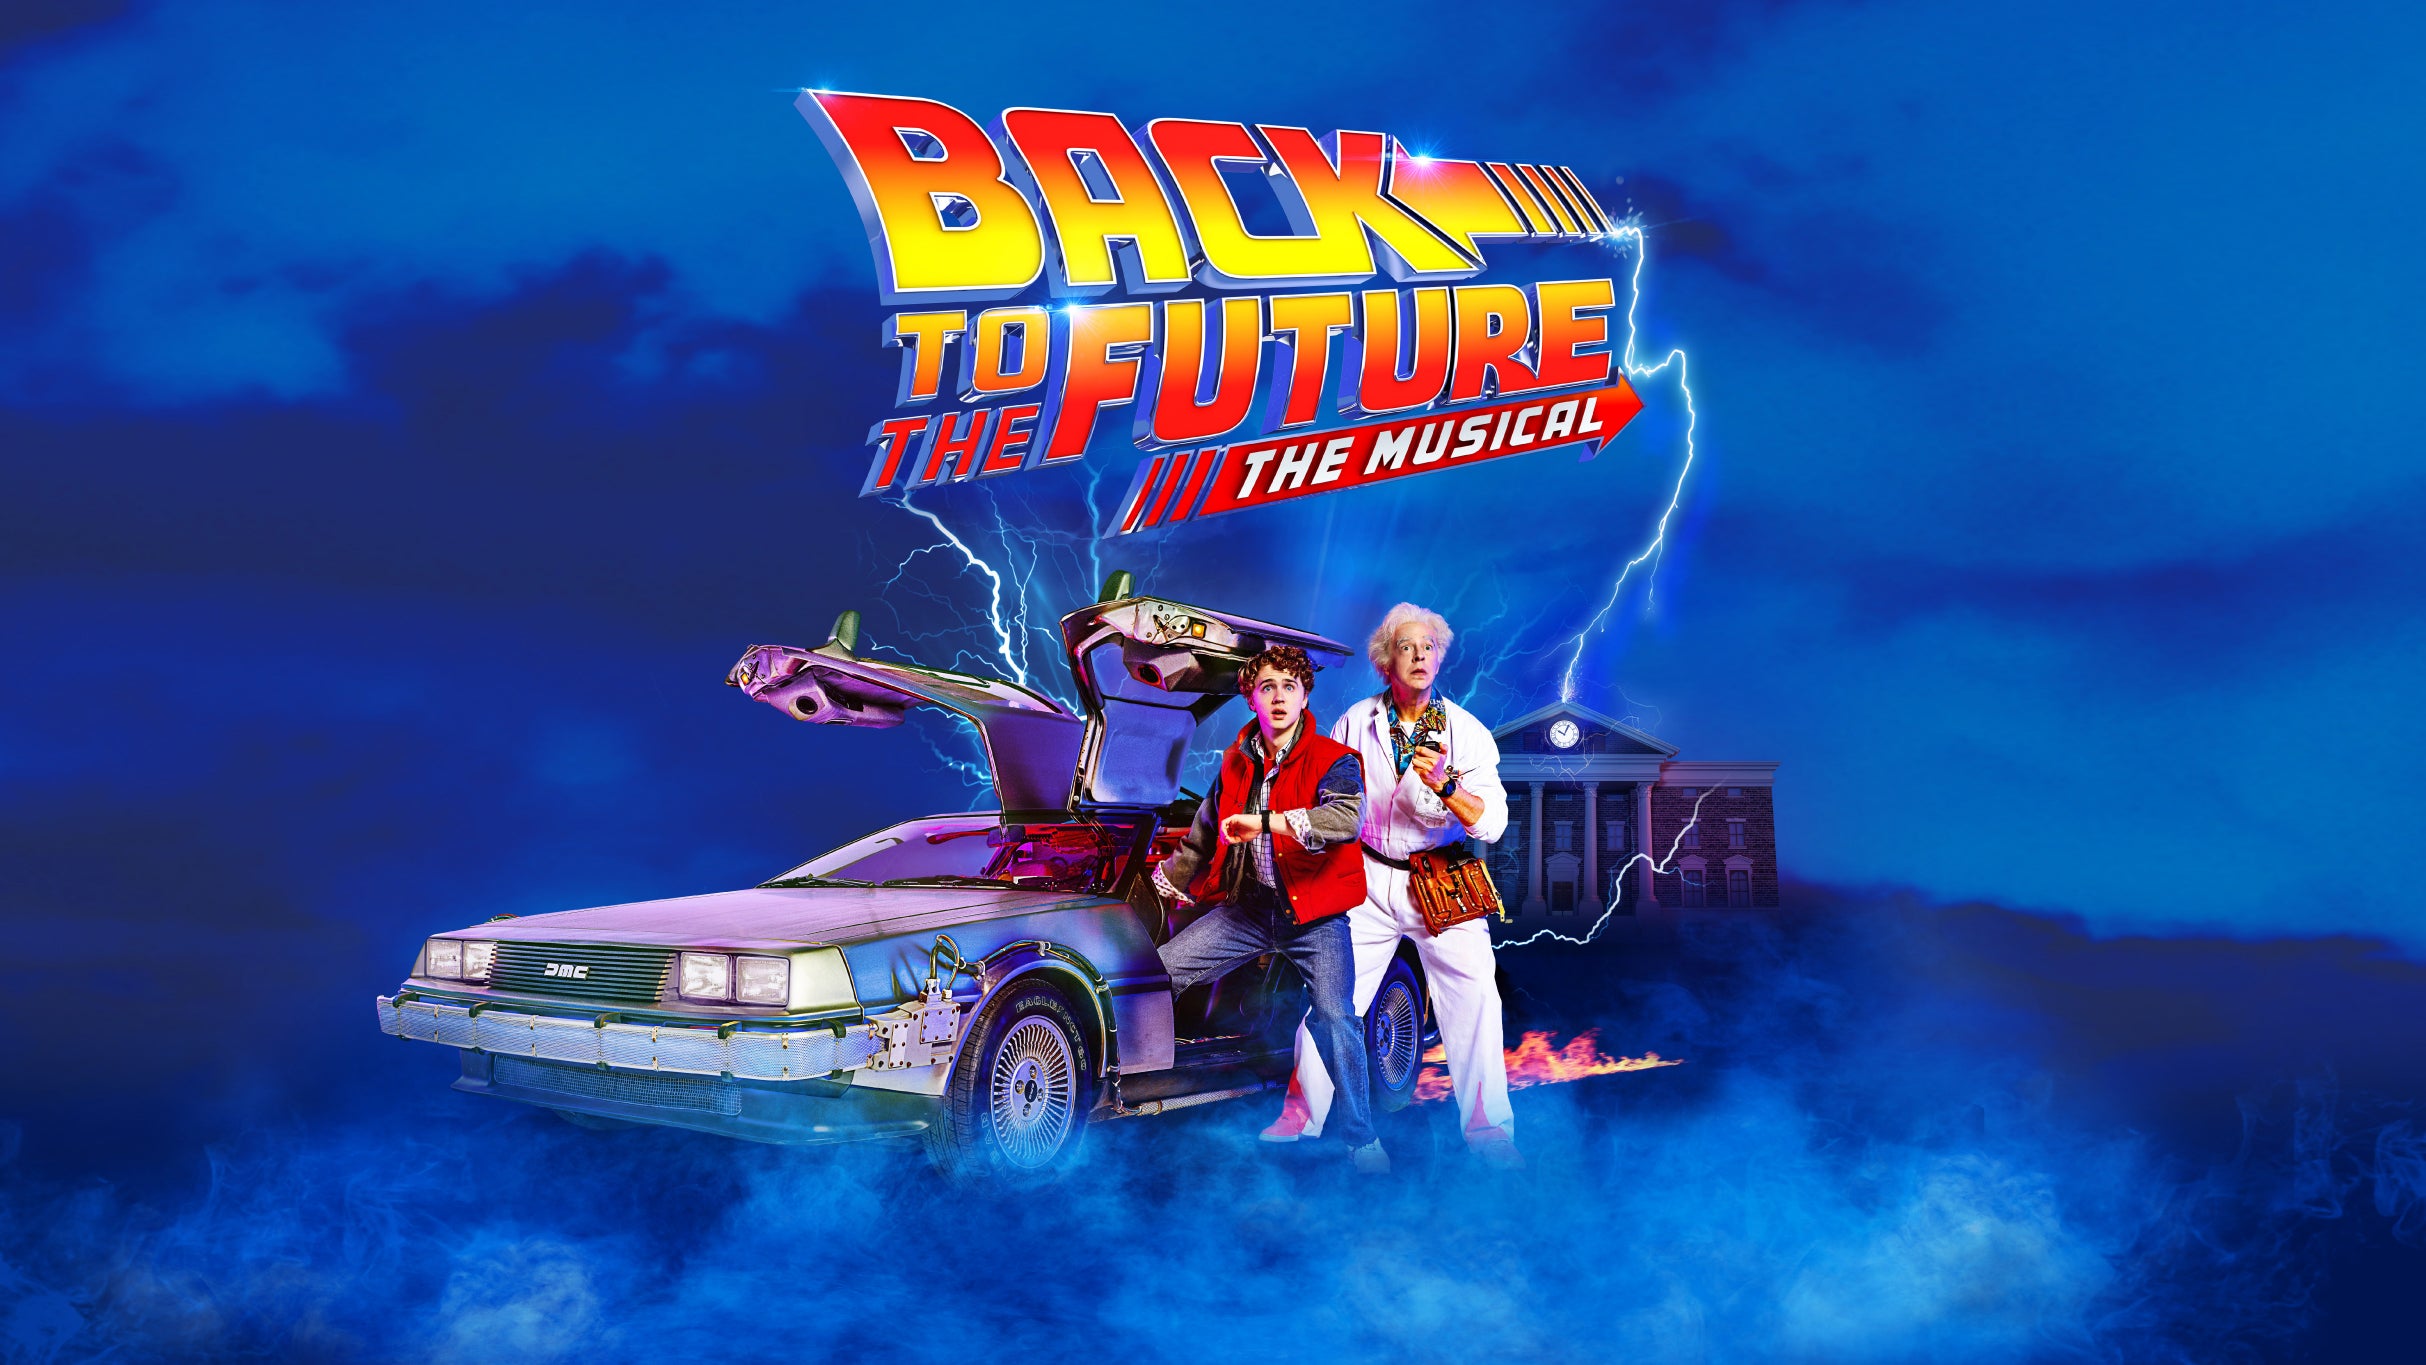 Back To The Future (Chicago) in Chicago promo photo for Internet Presales presale offer code